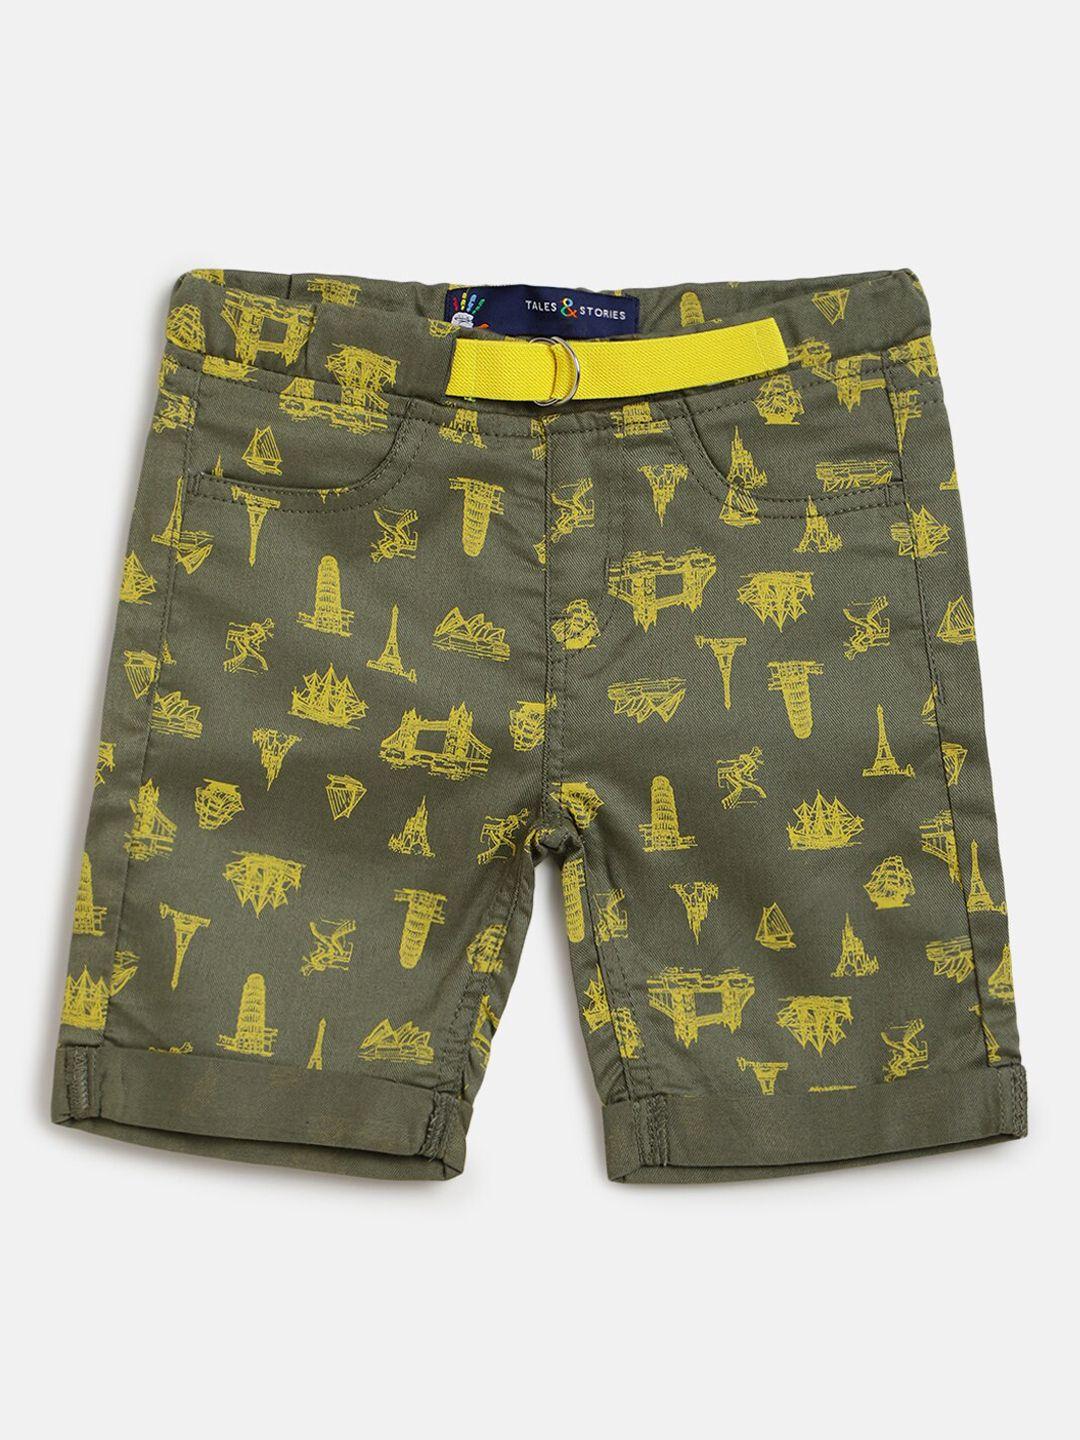 TALES & STORIES Boys Olive Green Conversational Printed Cotton Shorts